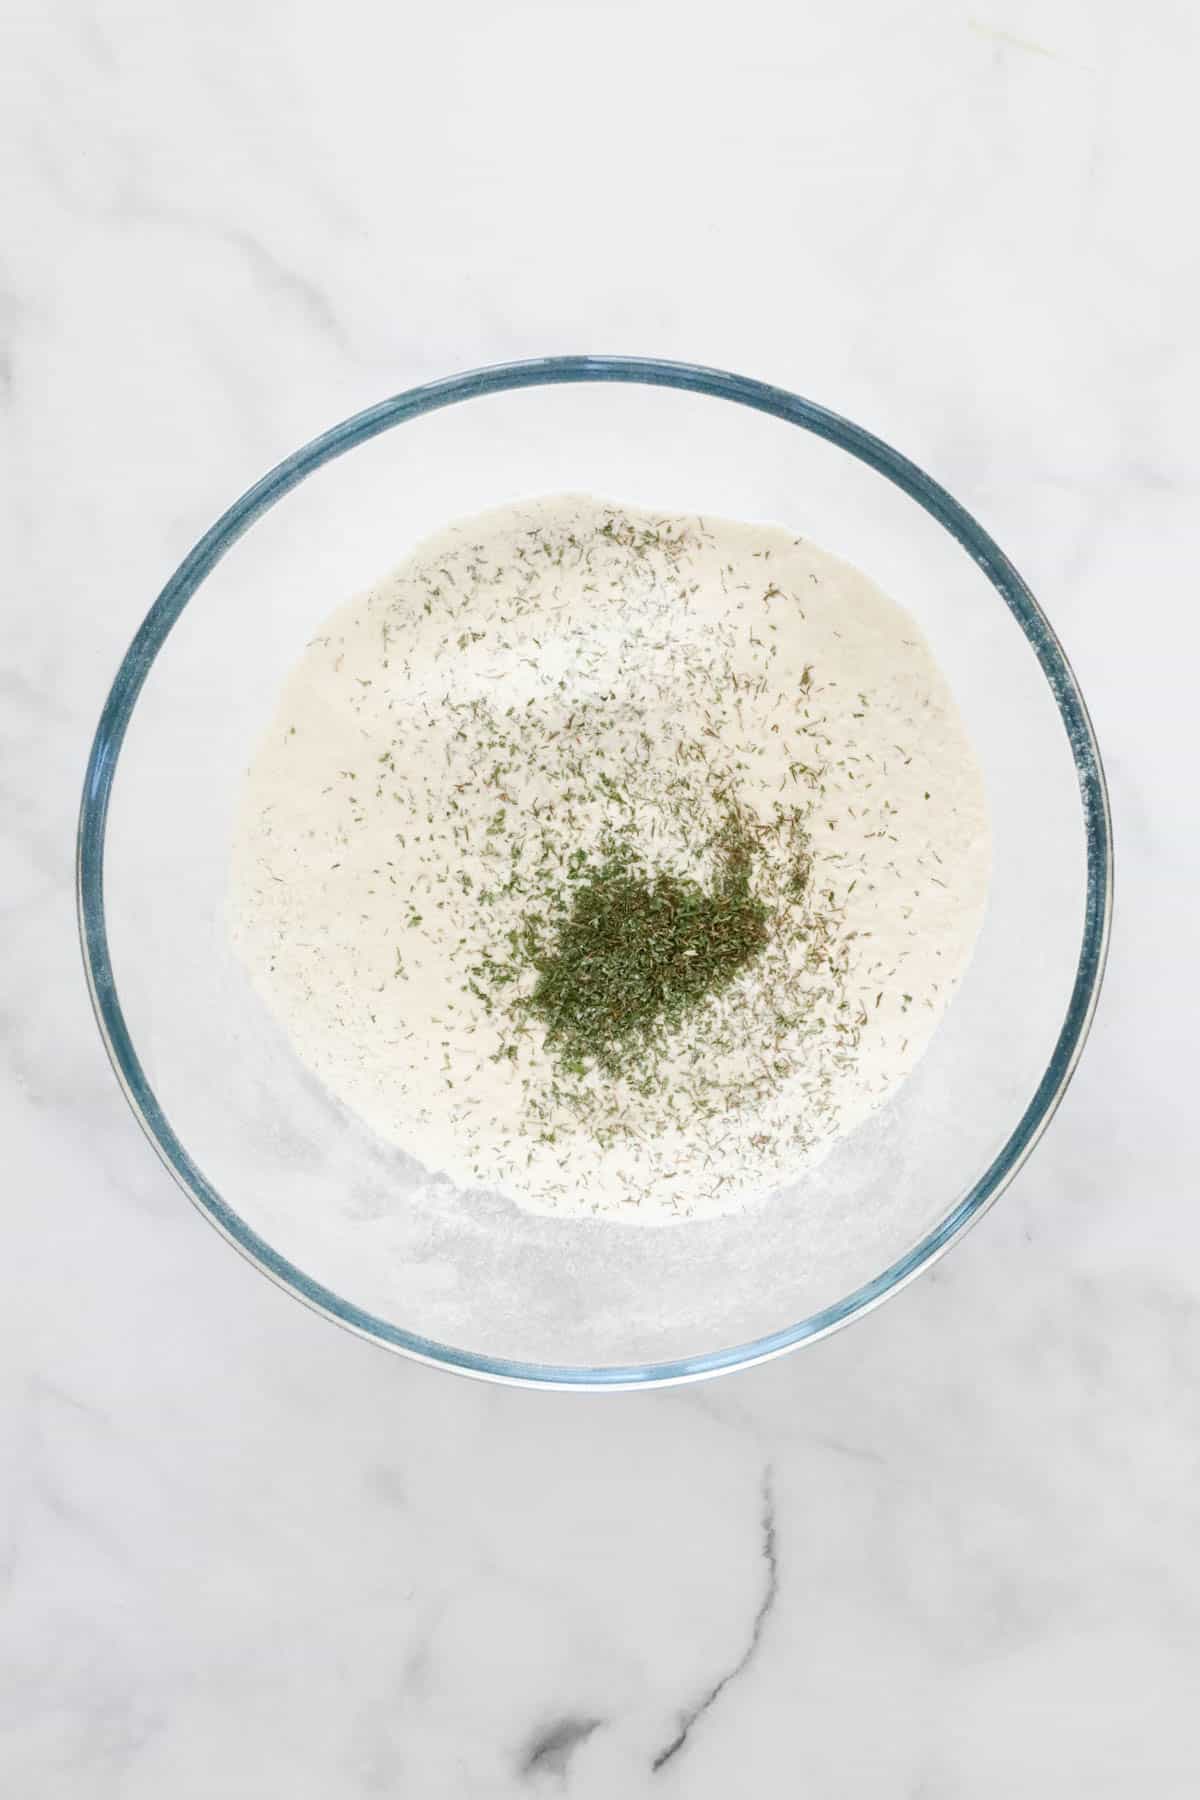 Flour and dried herbs in a mixing bowl.